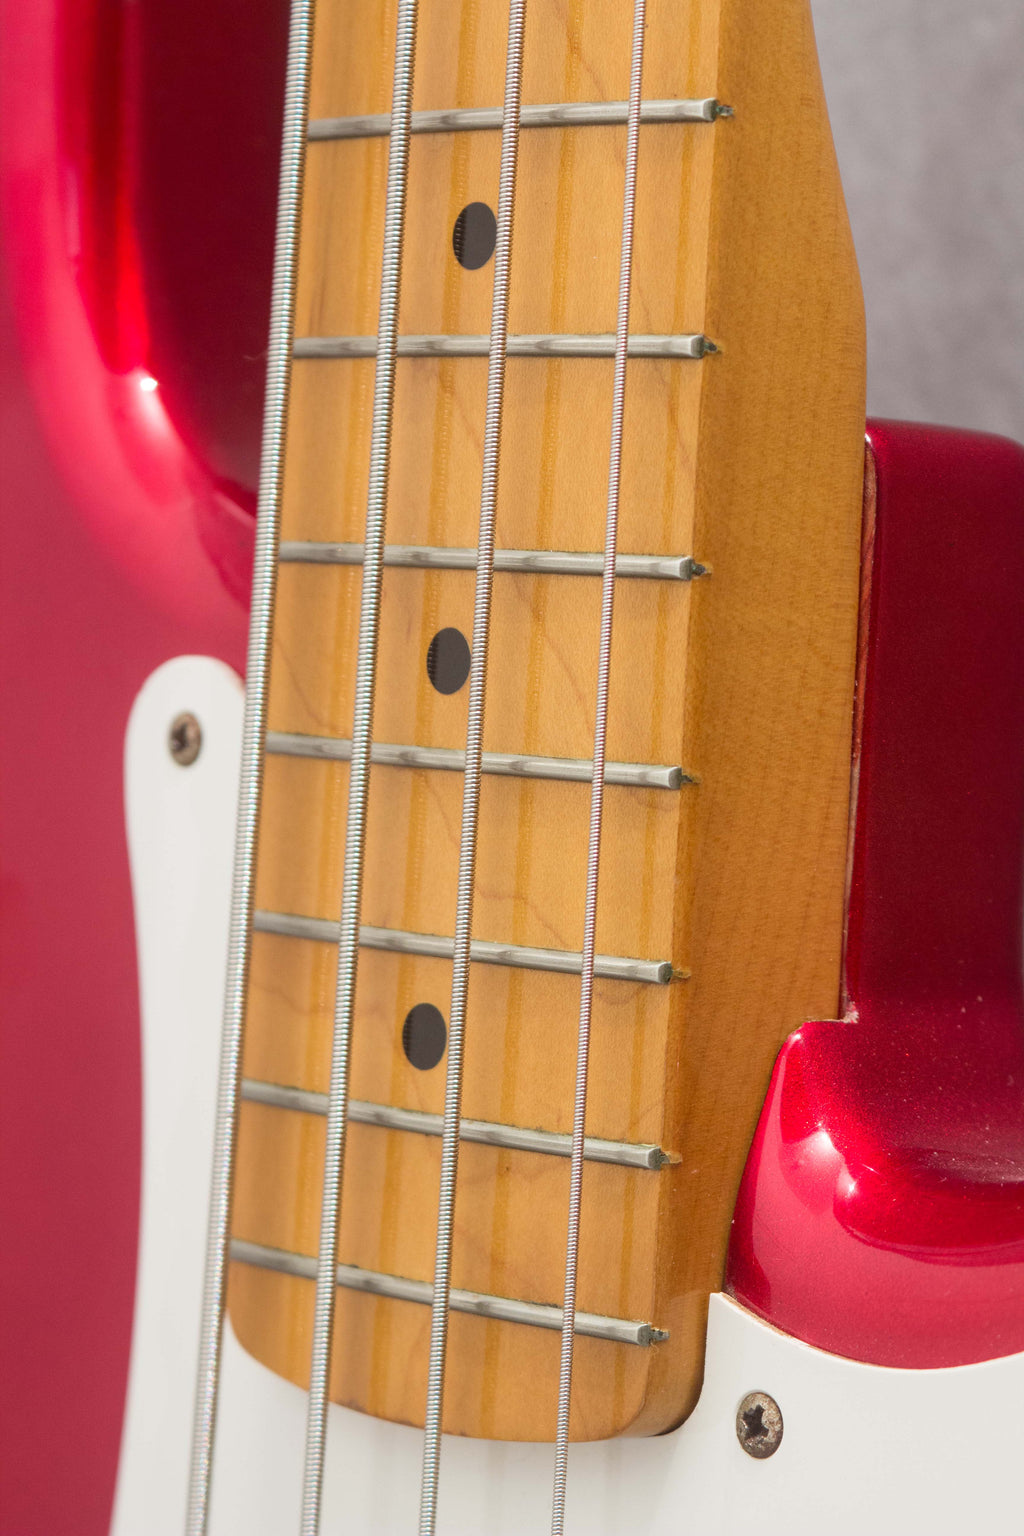 Fender Japan '57 Precision Bass PB57-53 Candy Apple Red 1996